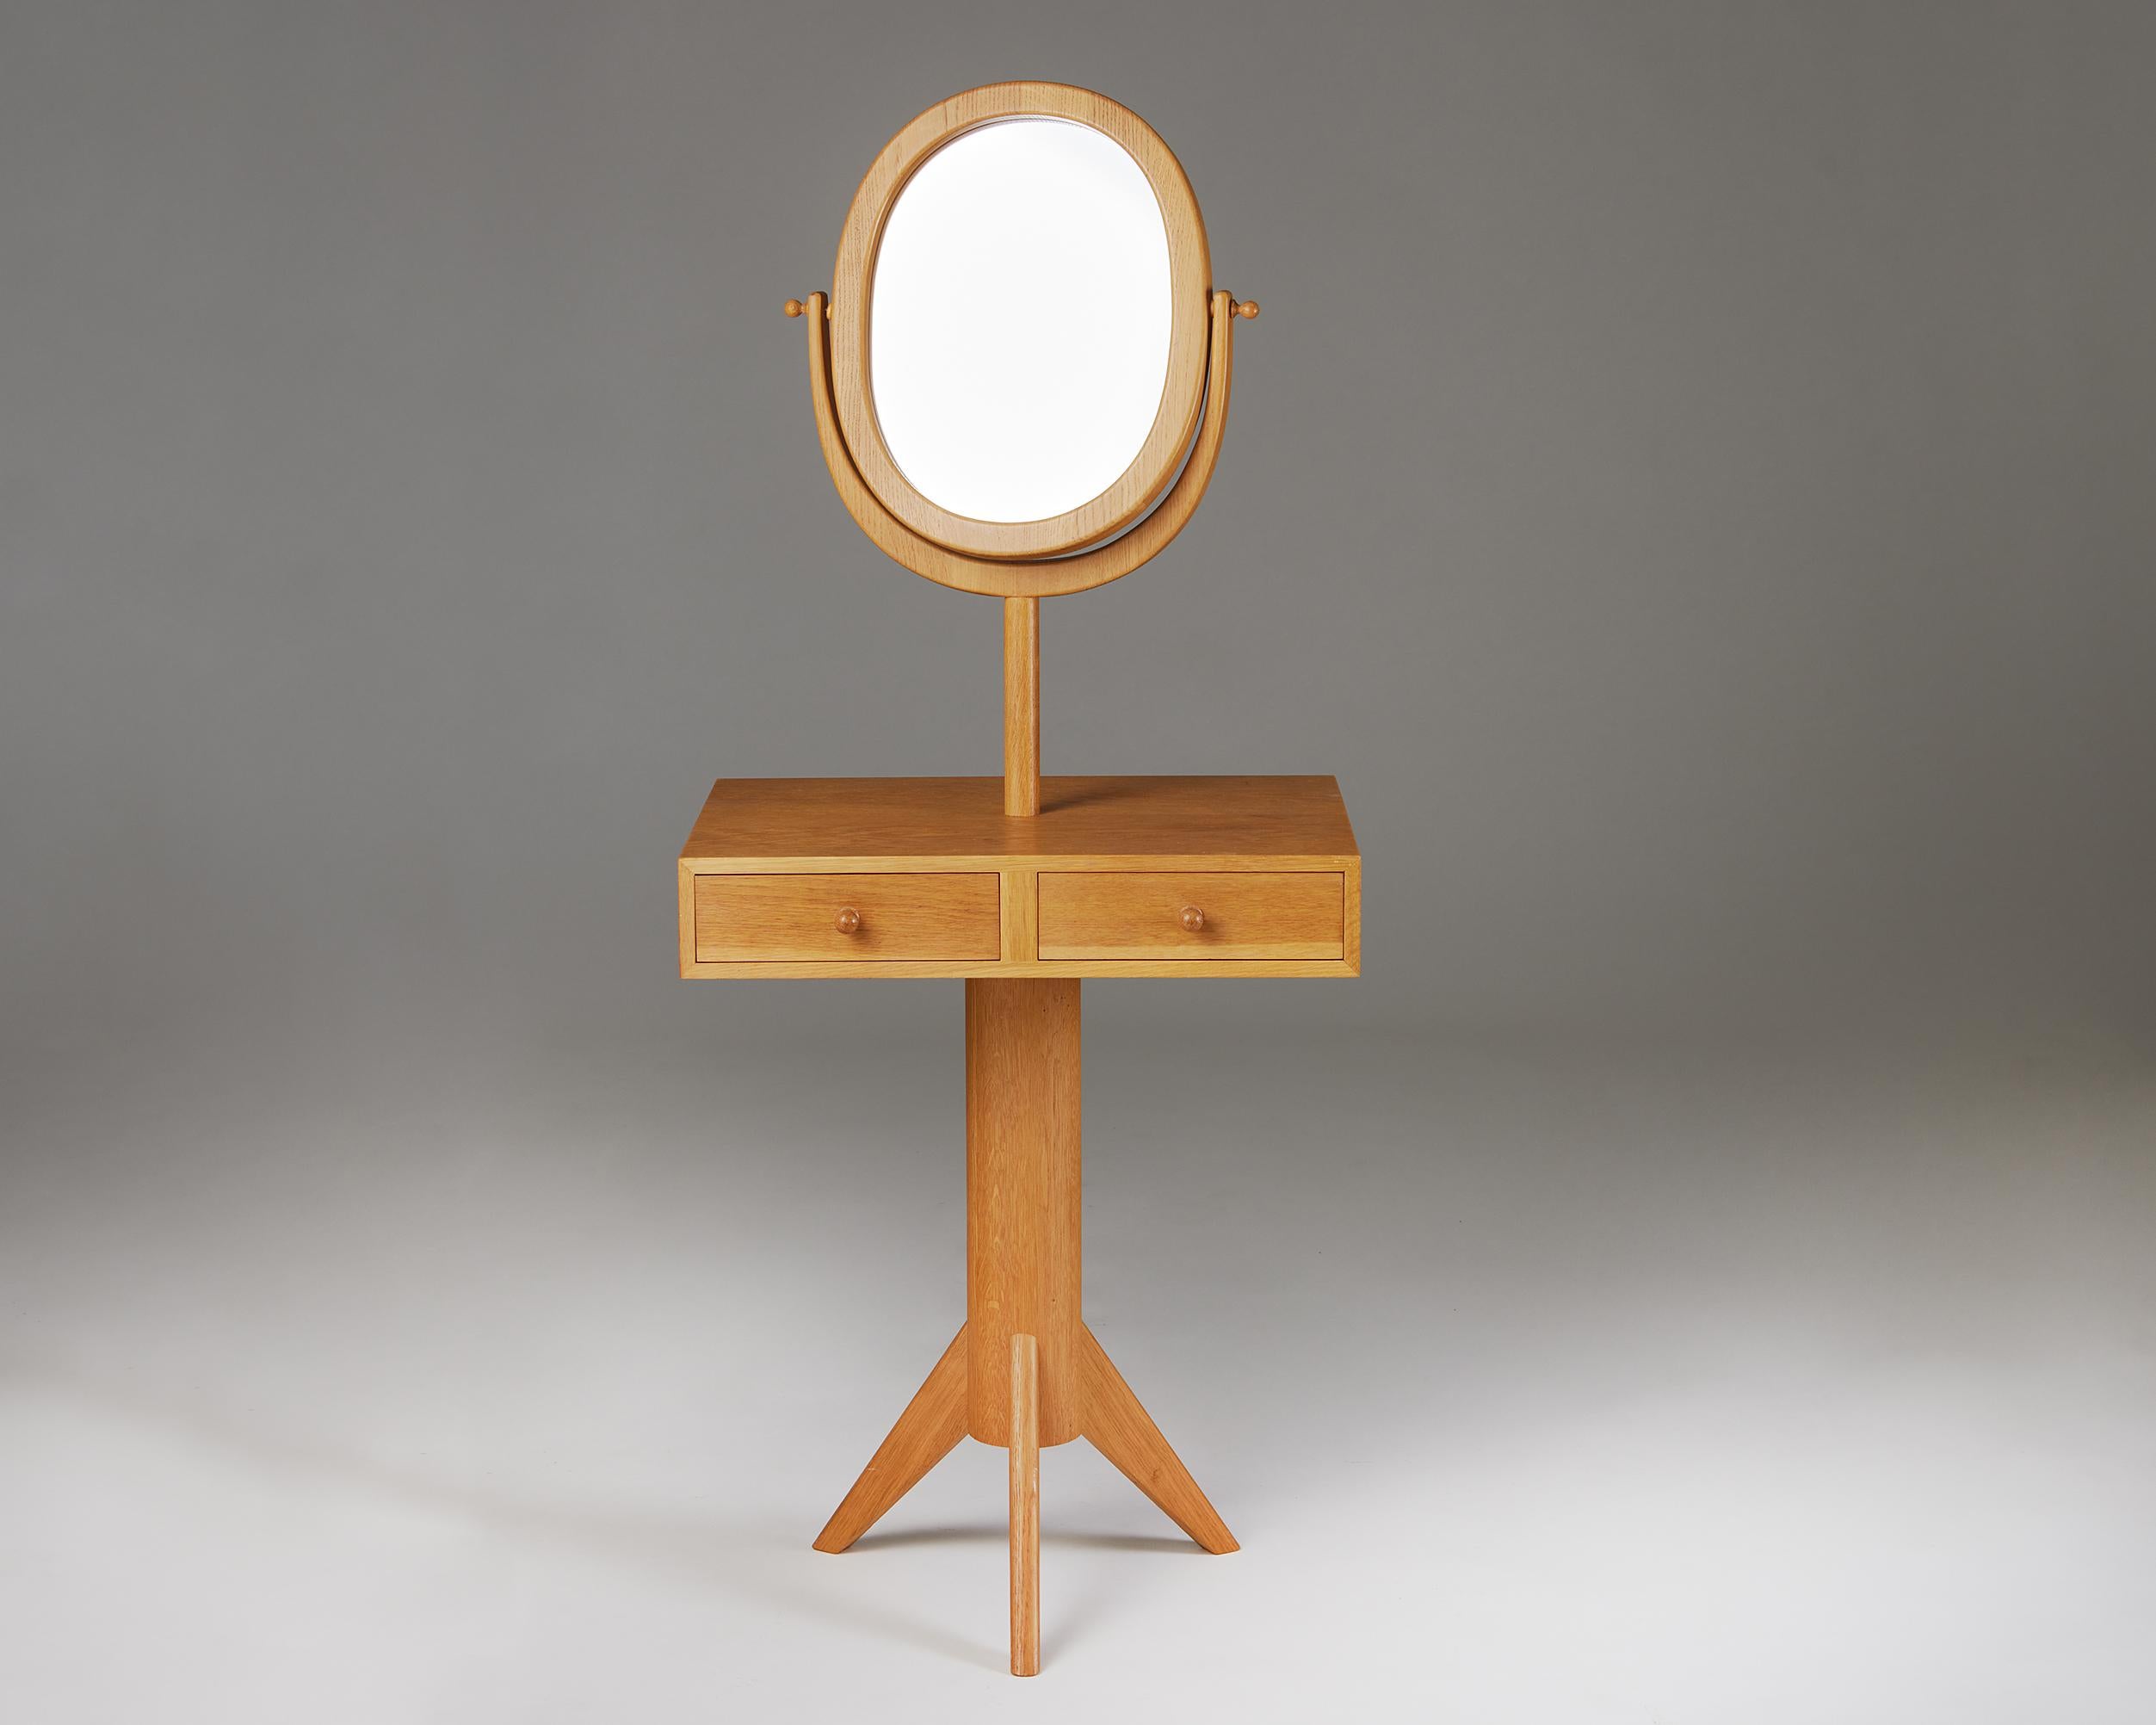 Dressing table designed by Erik Höglund for Kopparfly,
Sweden. 1960s.

Oak and mirrored glass.

Measurements: 
H: 130 cm / 4' 3''
W: 55 cm / 21 2/3''
D: 42 cm / 16 1/2''.